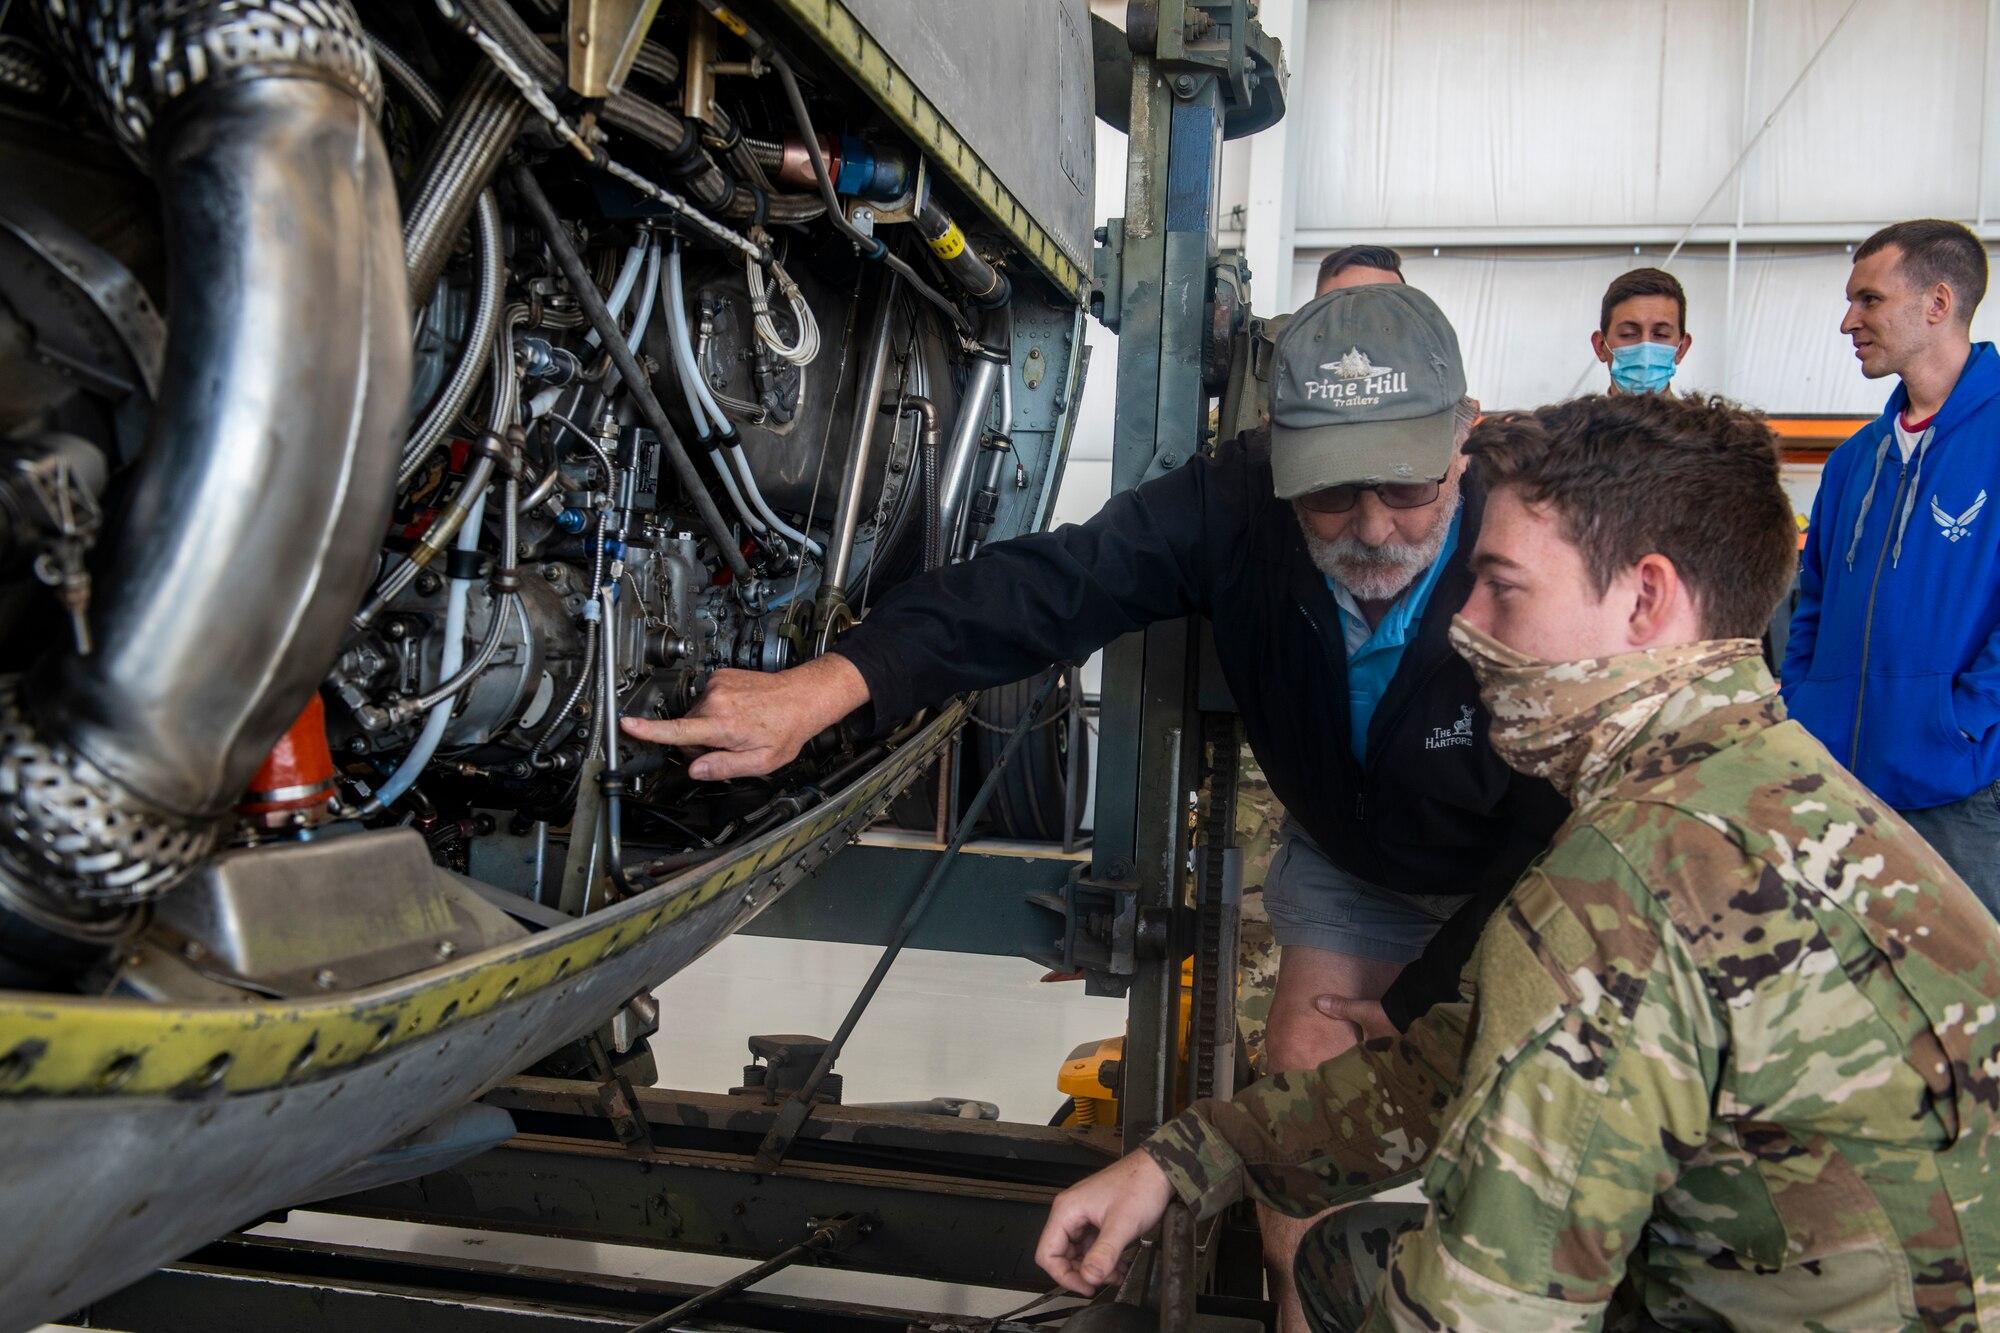 A civilian retiree and an active duty airman look at an aircraft engine.